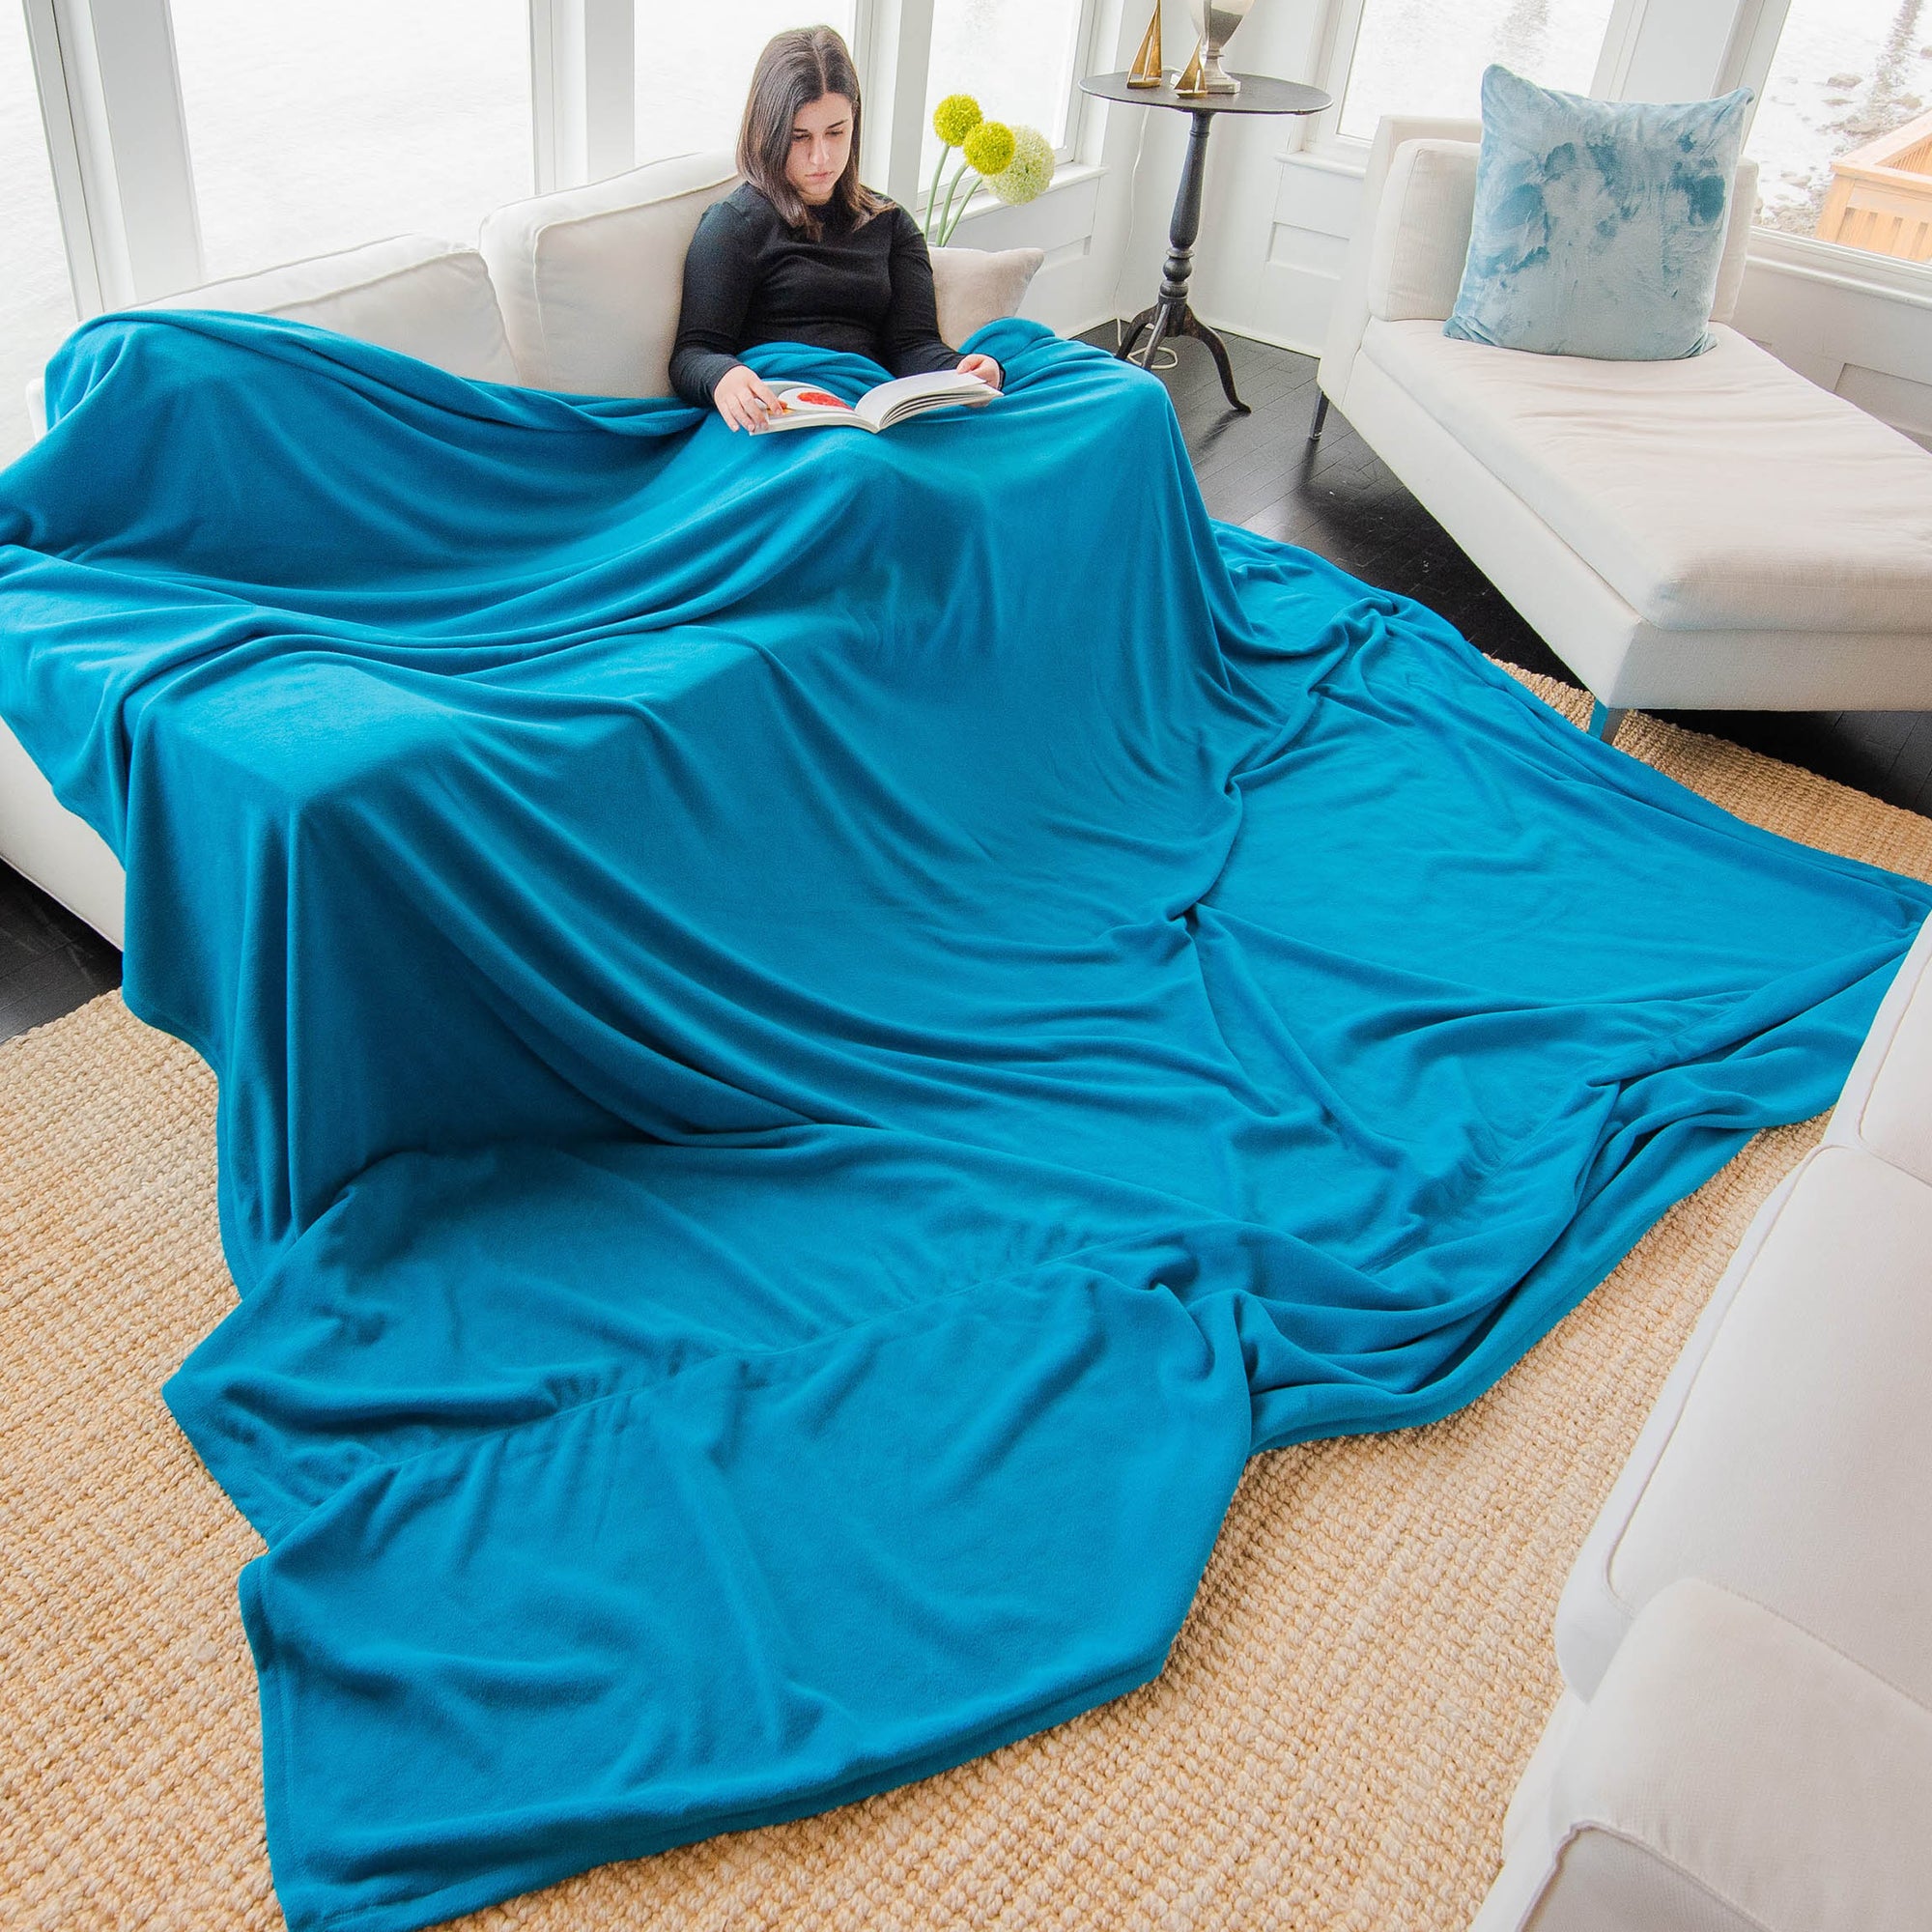 How to Make a King Sized Fleece Blanket